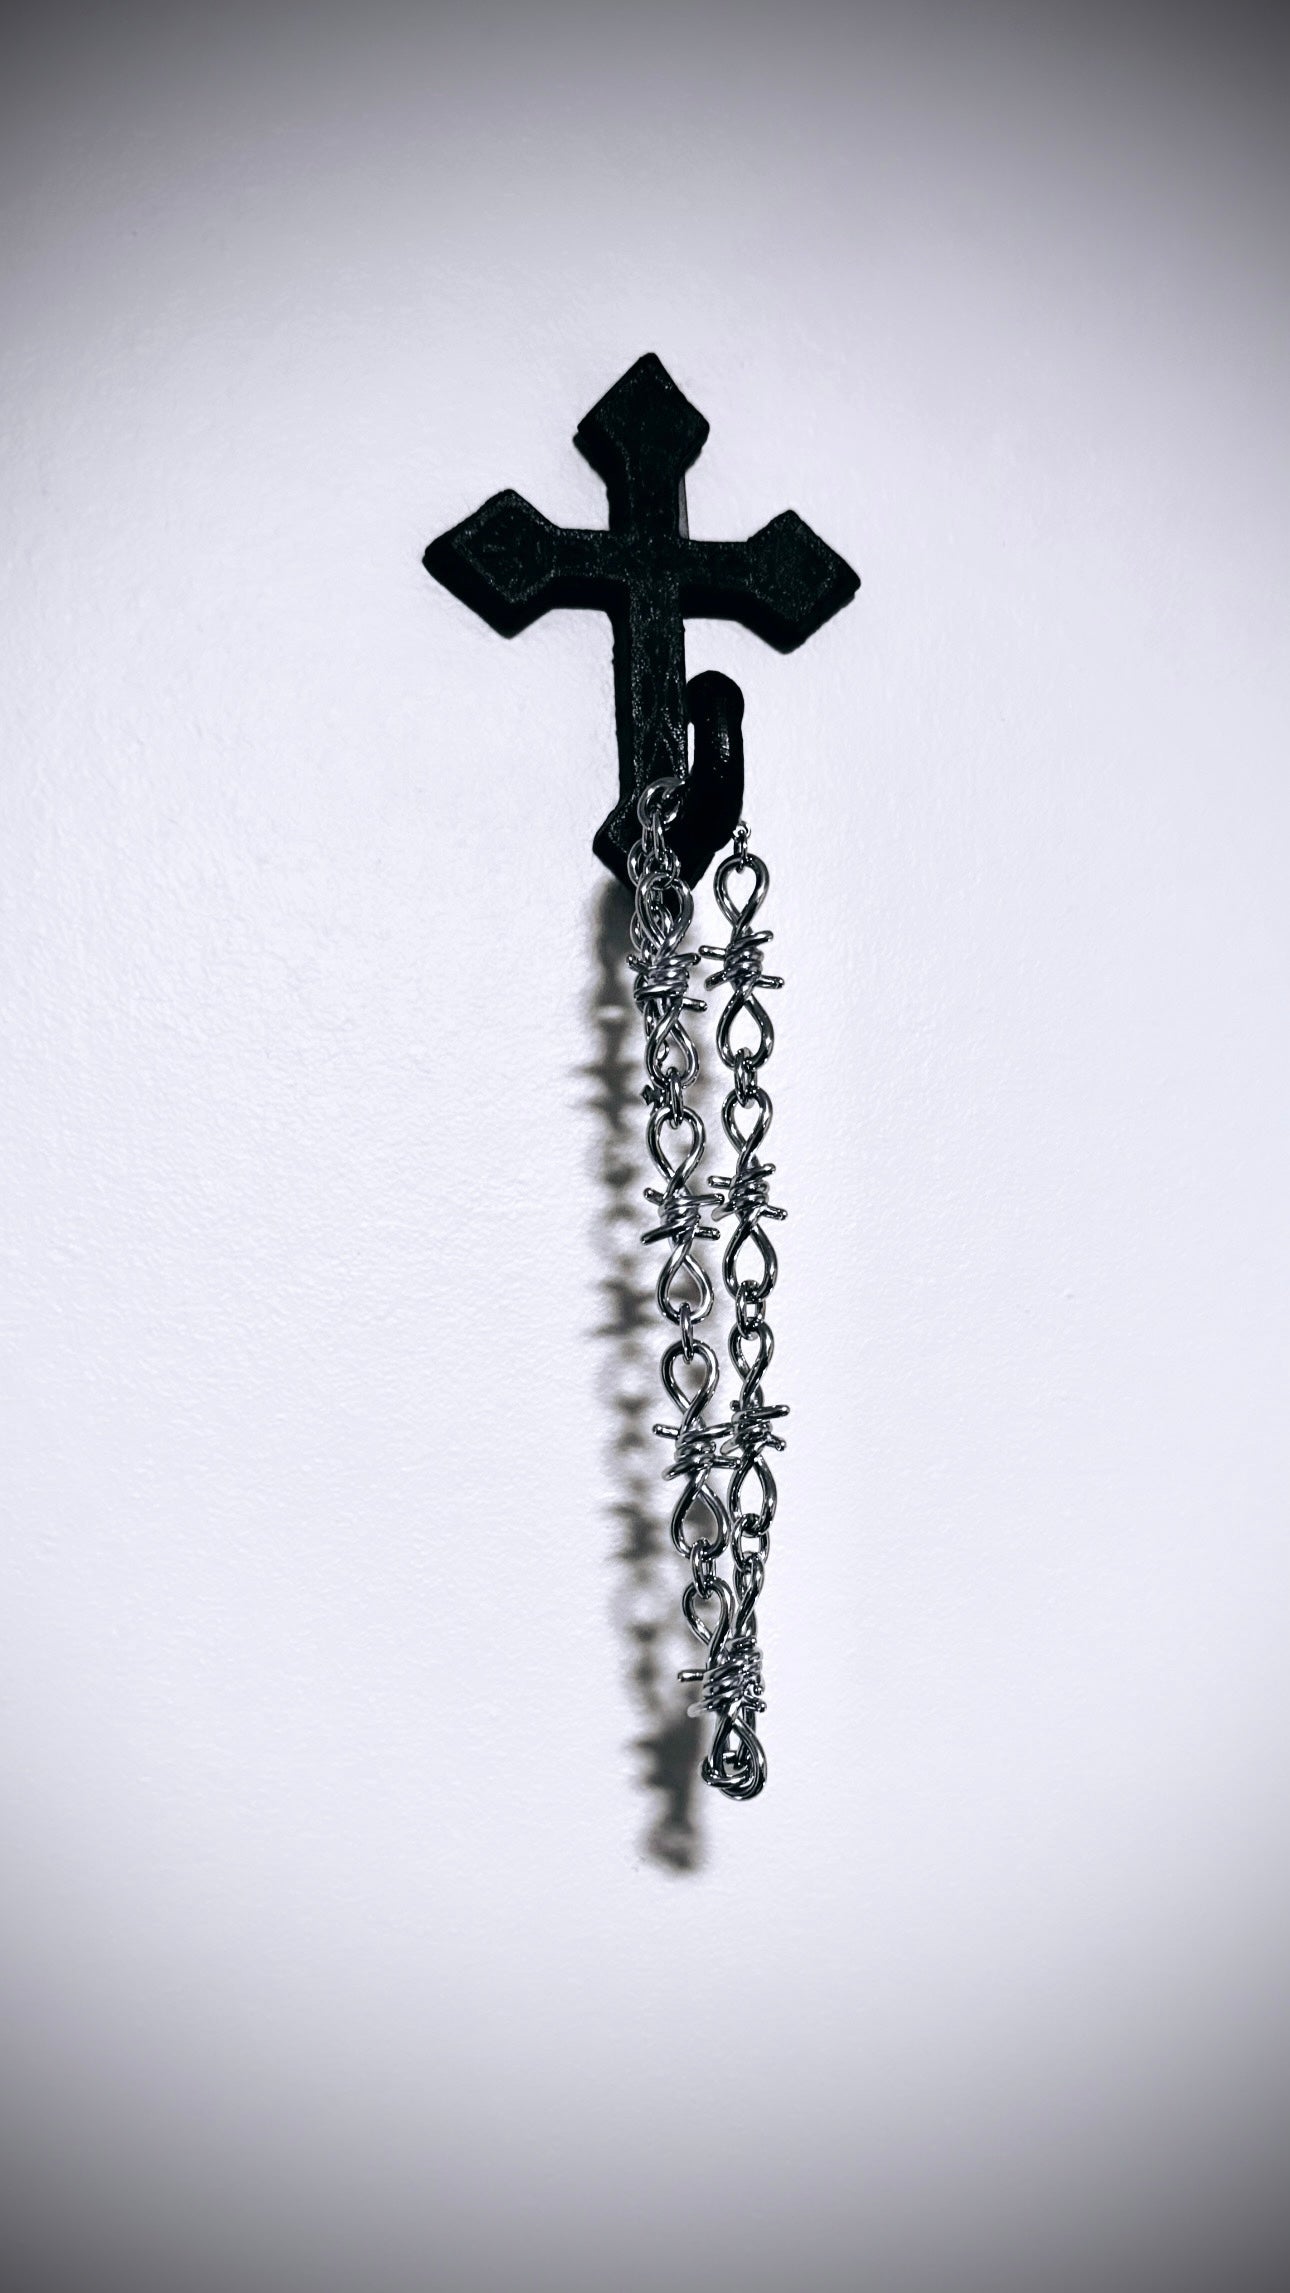 Full barbed wire necklace hanging from cross on wall 